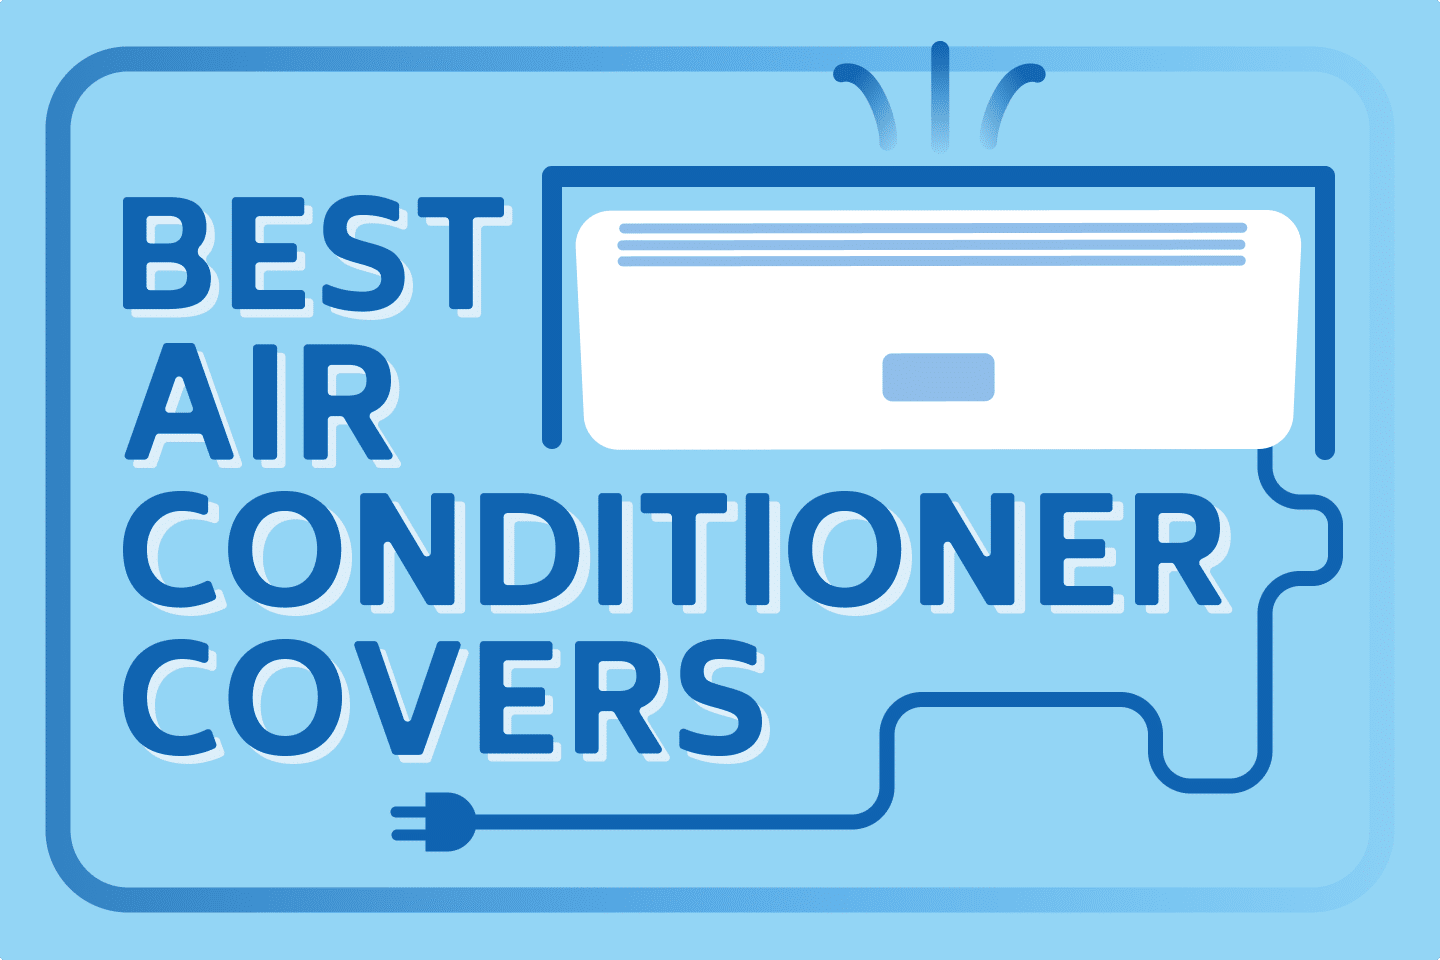 Air Conditioner Covers [5 Best Choices For Your AC]